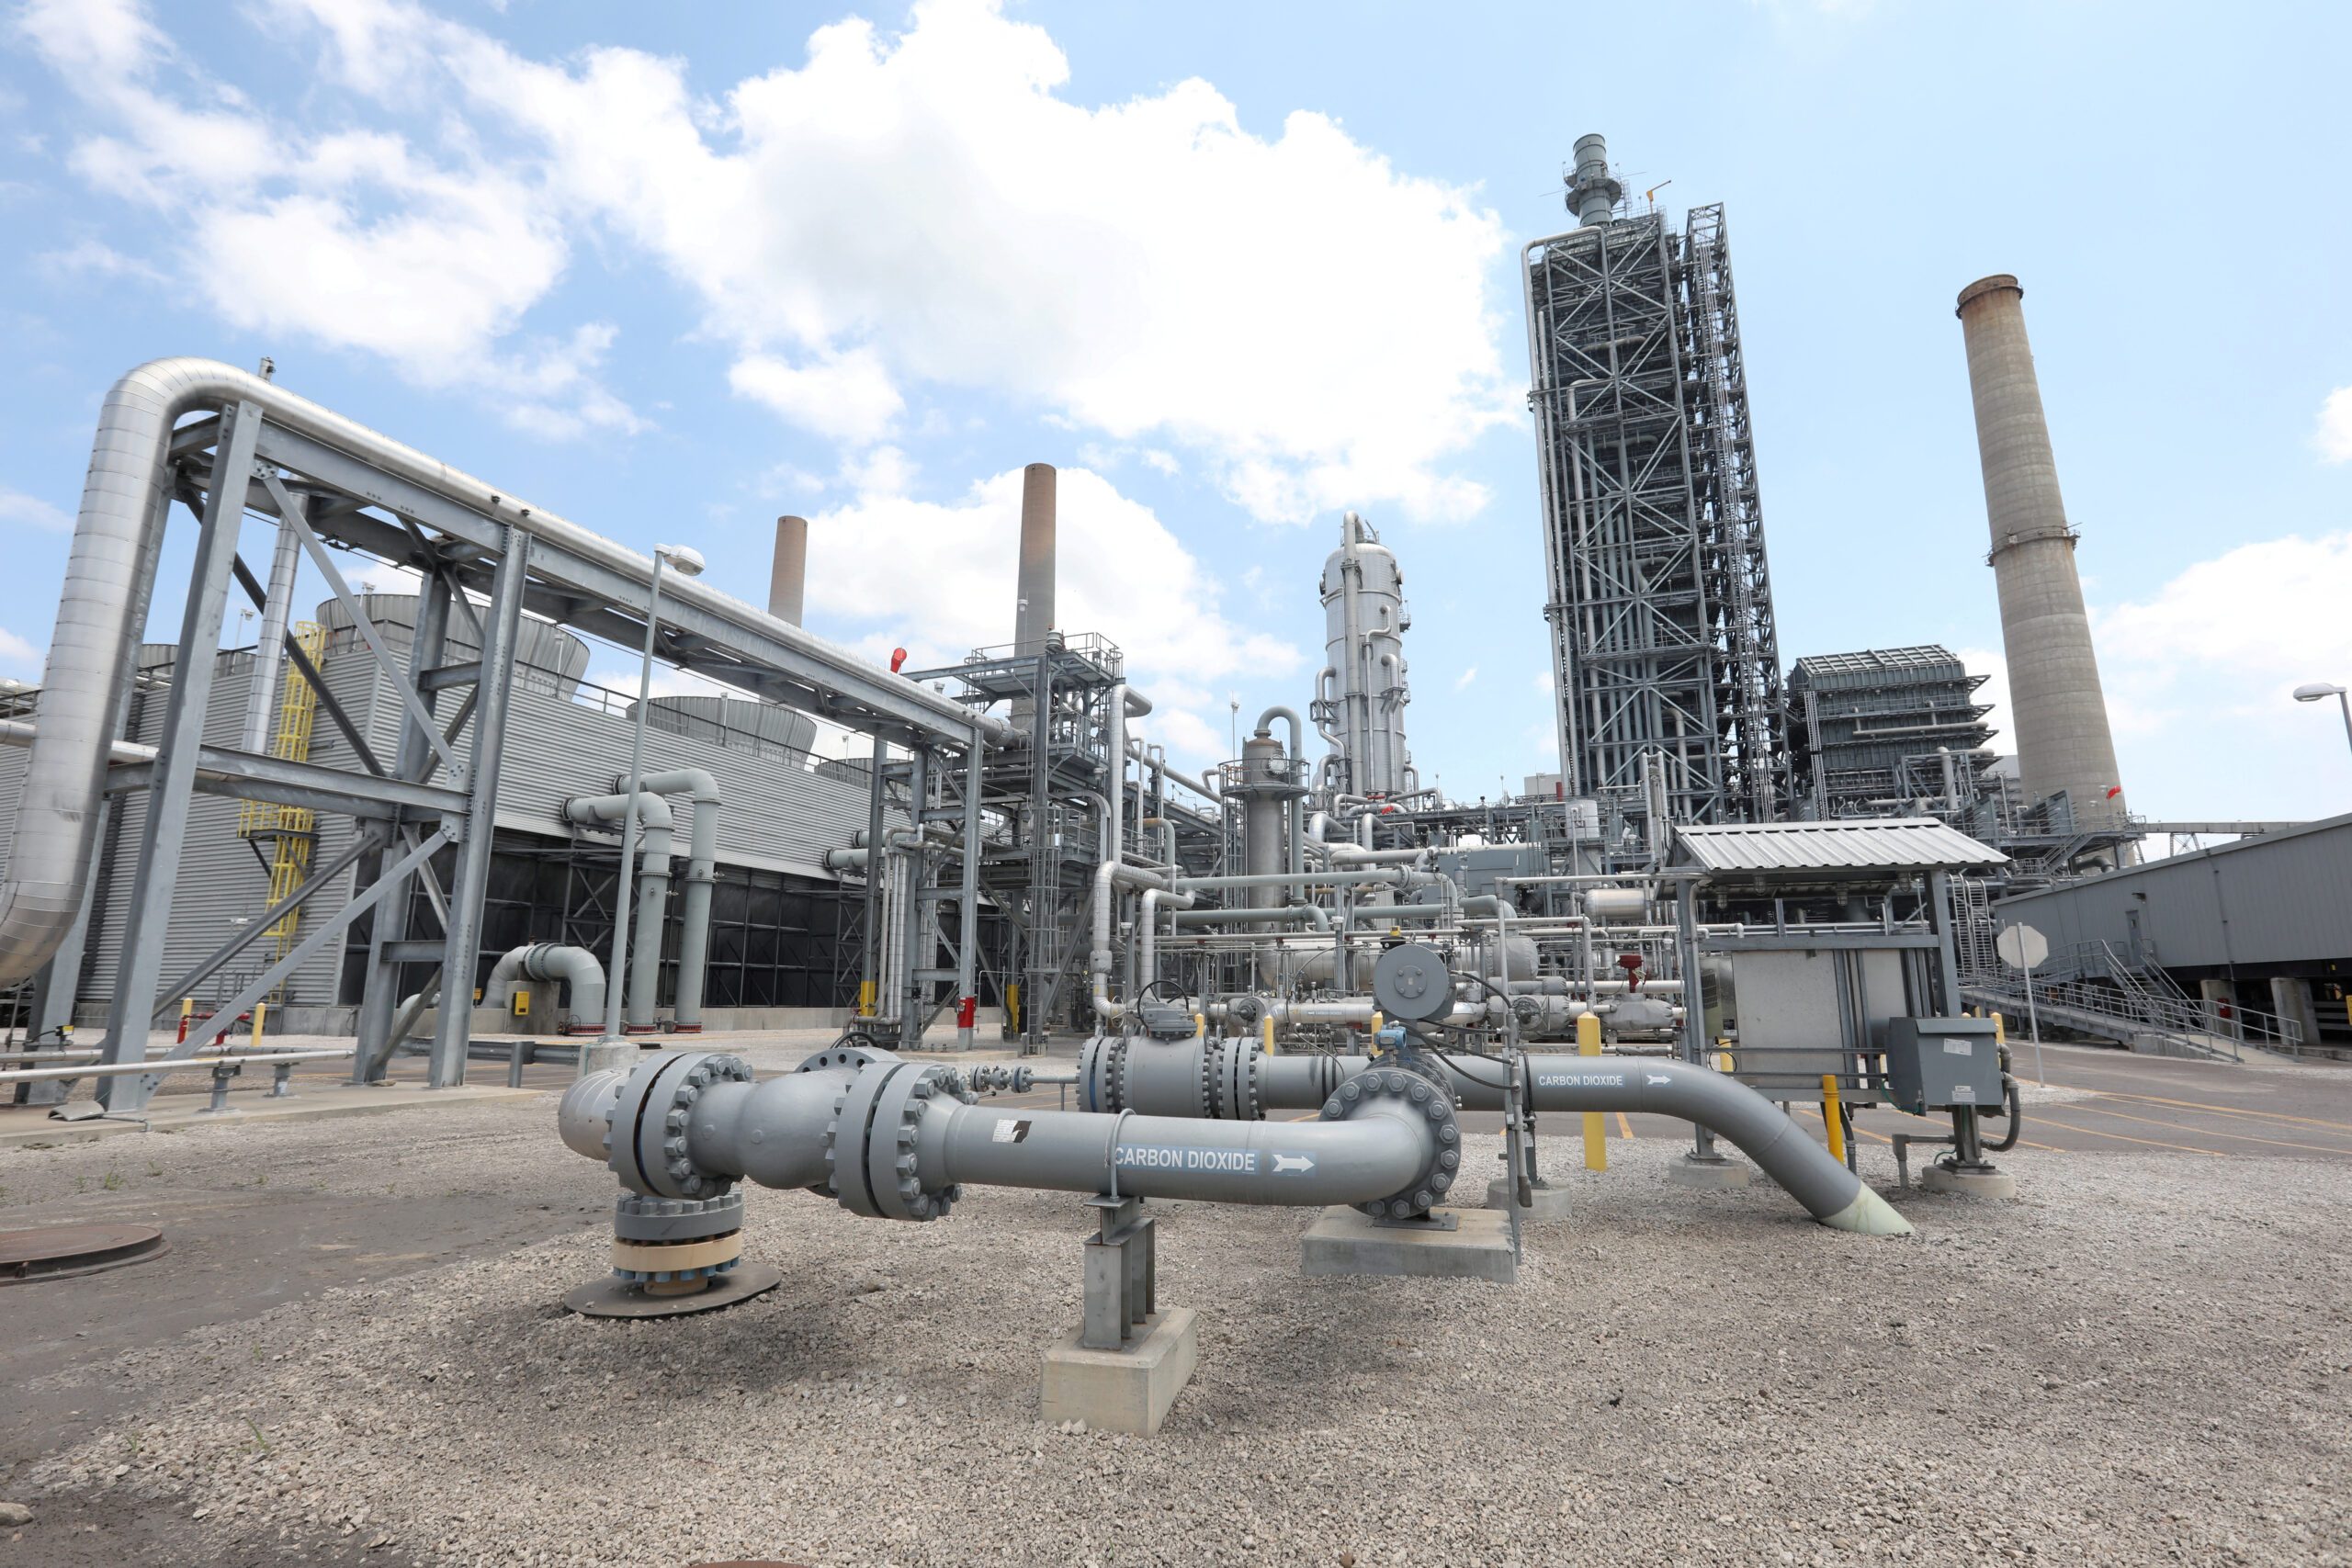 Carbon capture transports CO2 via pipelines to underground storage facilities